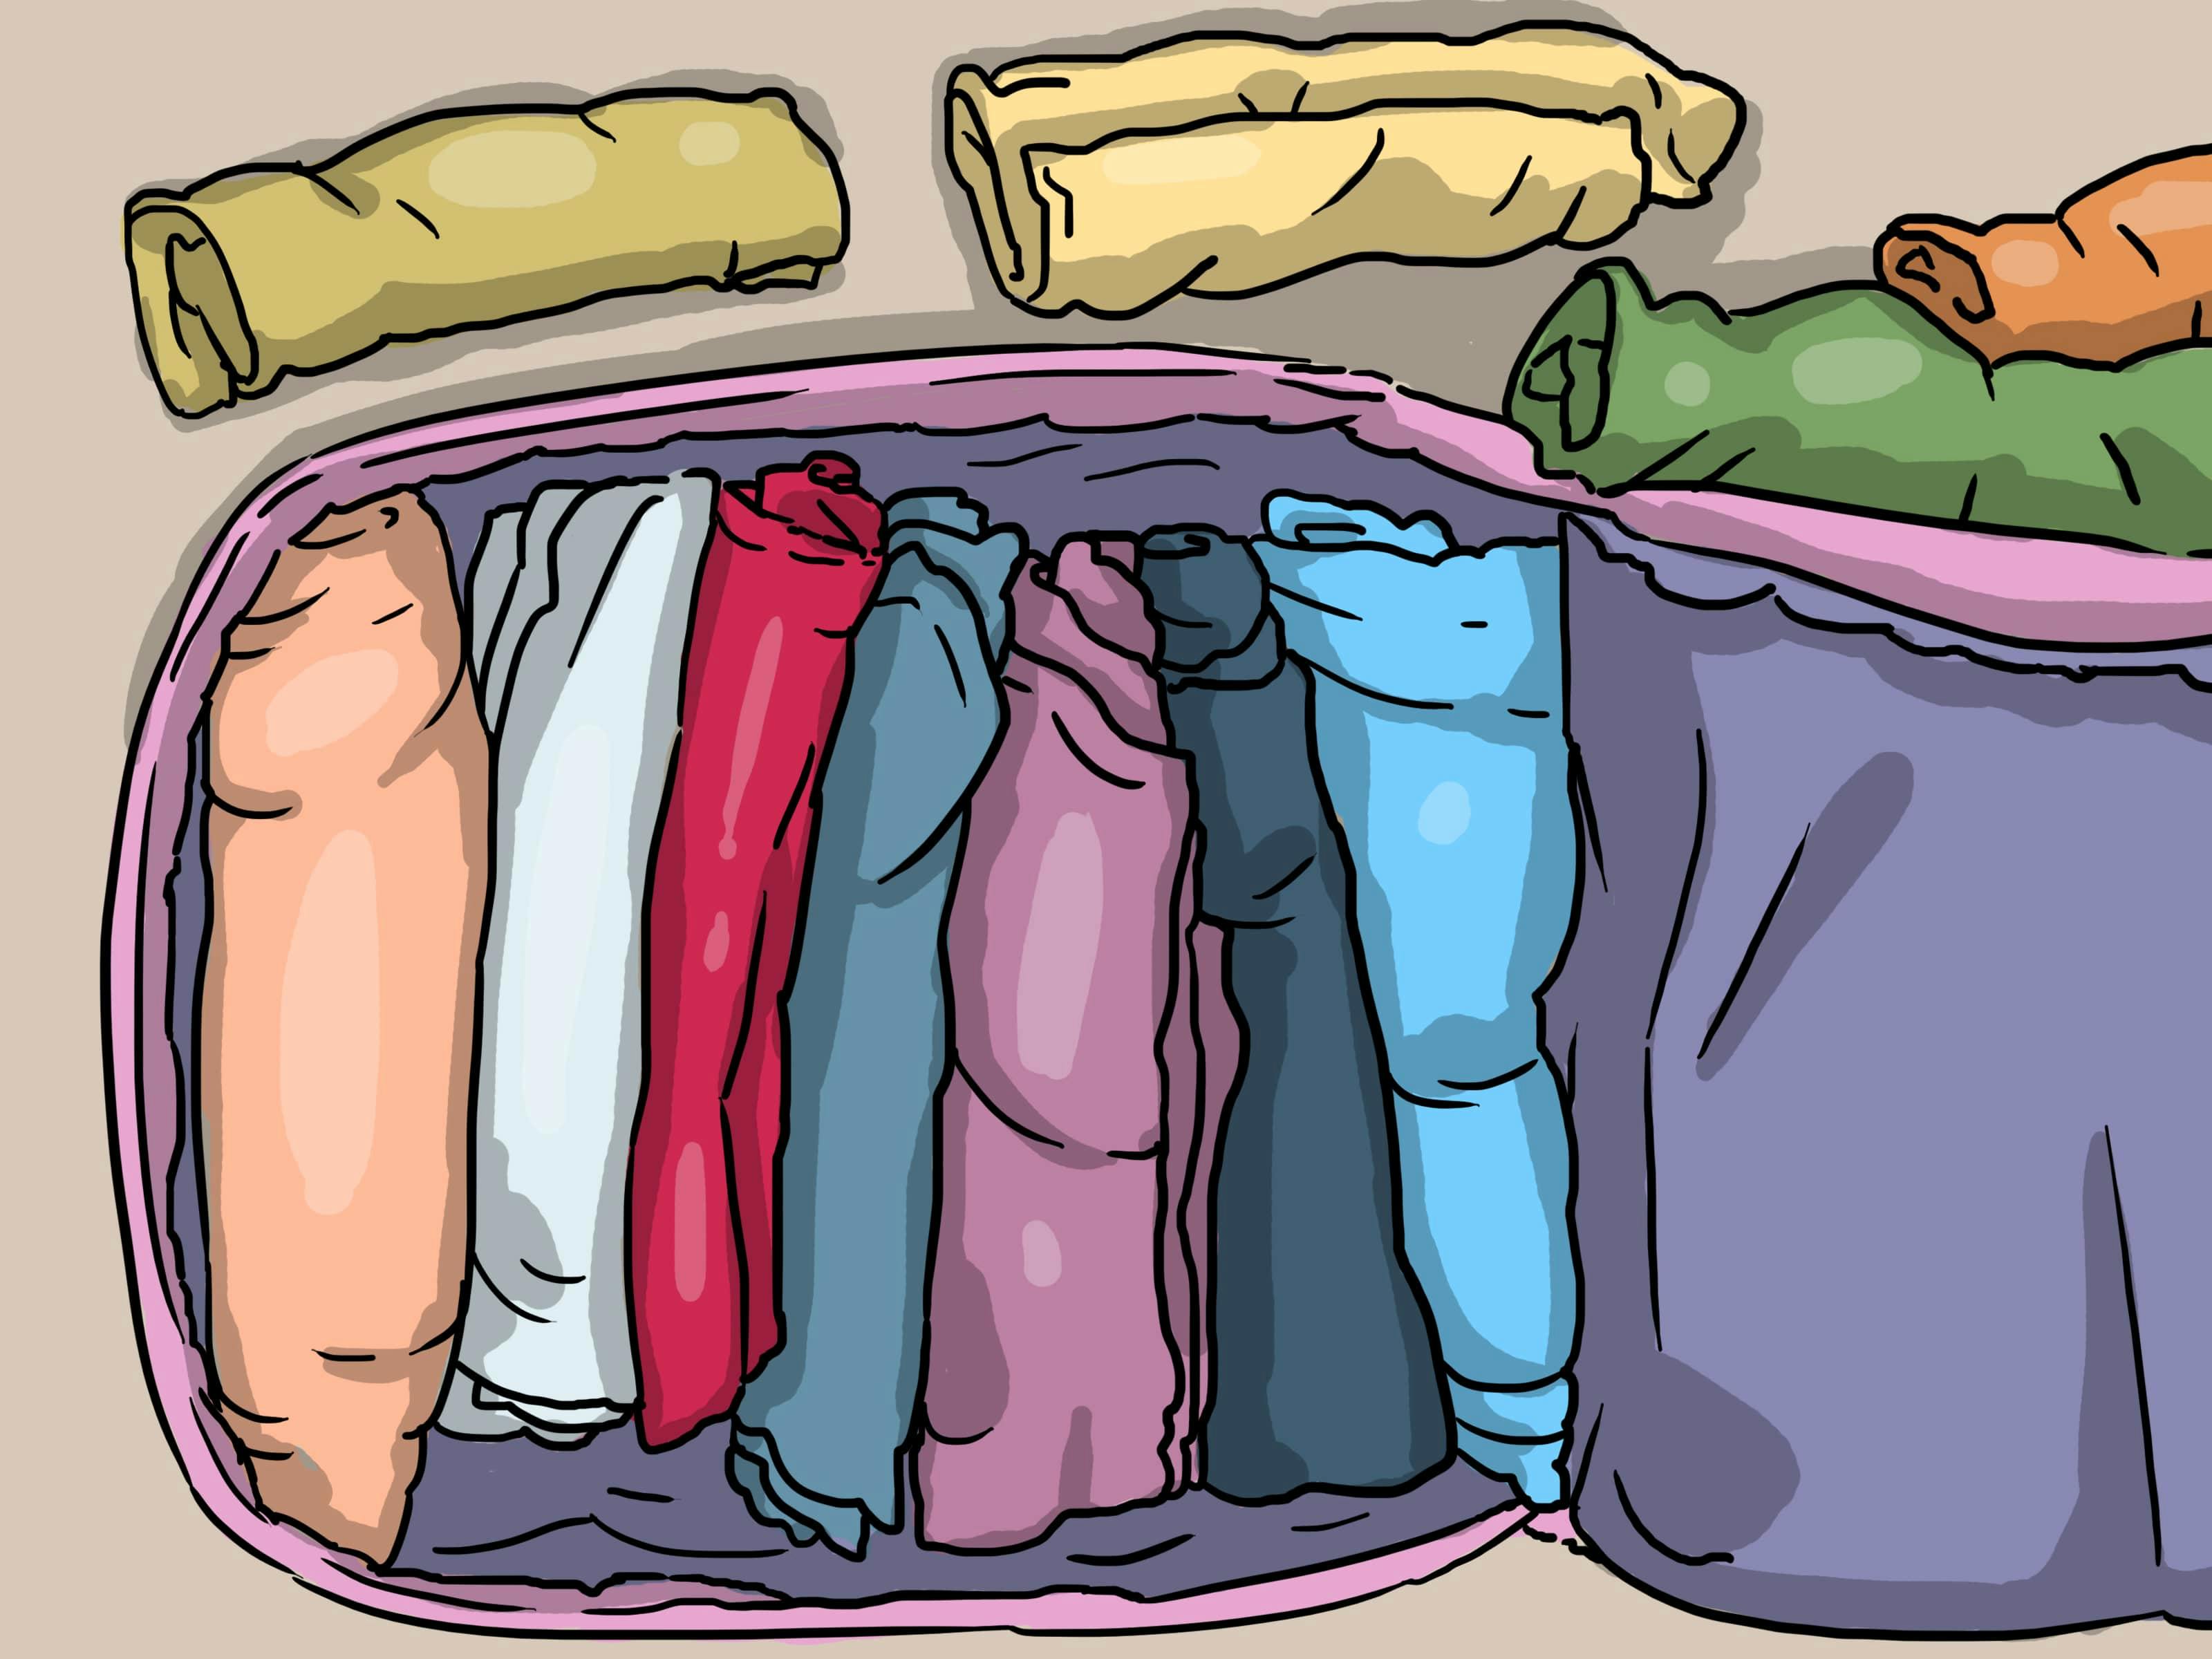 Roll your shirts and tops to save room in your suitcase